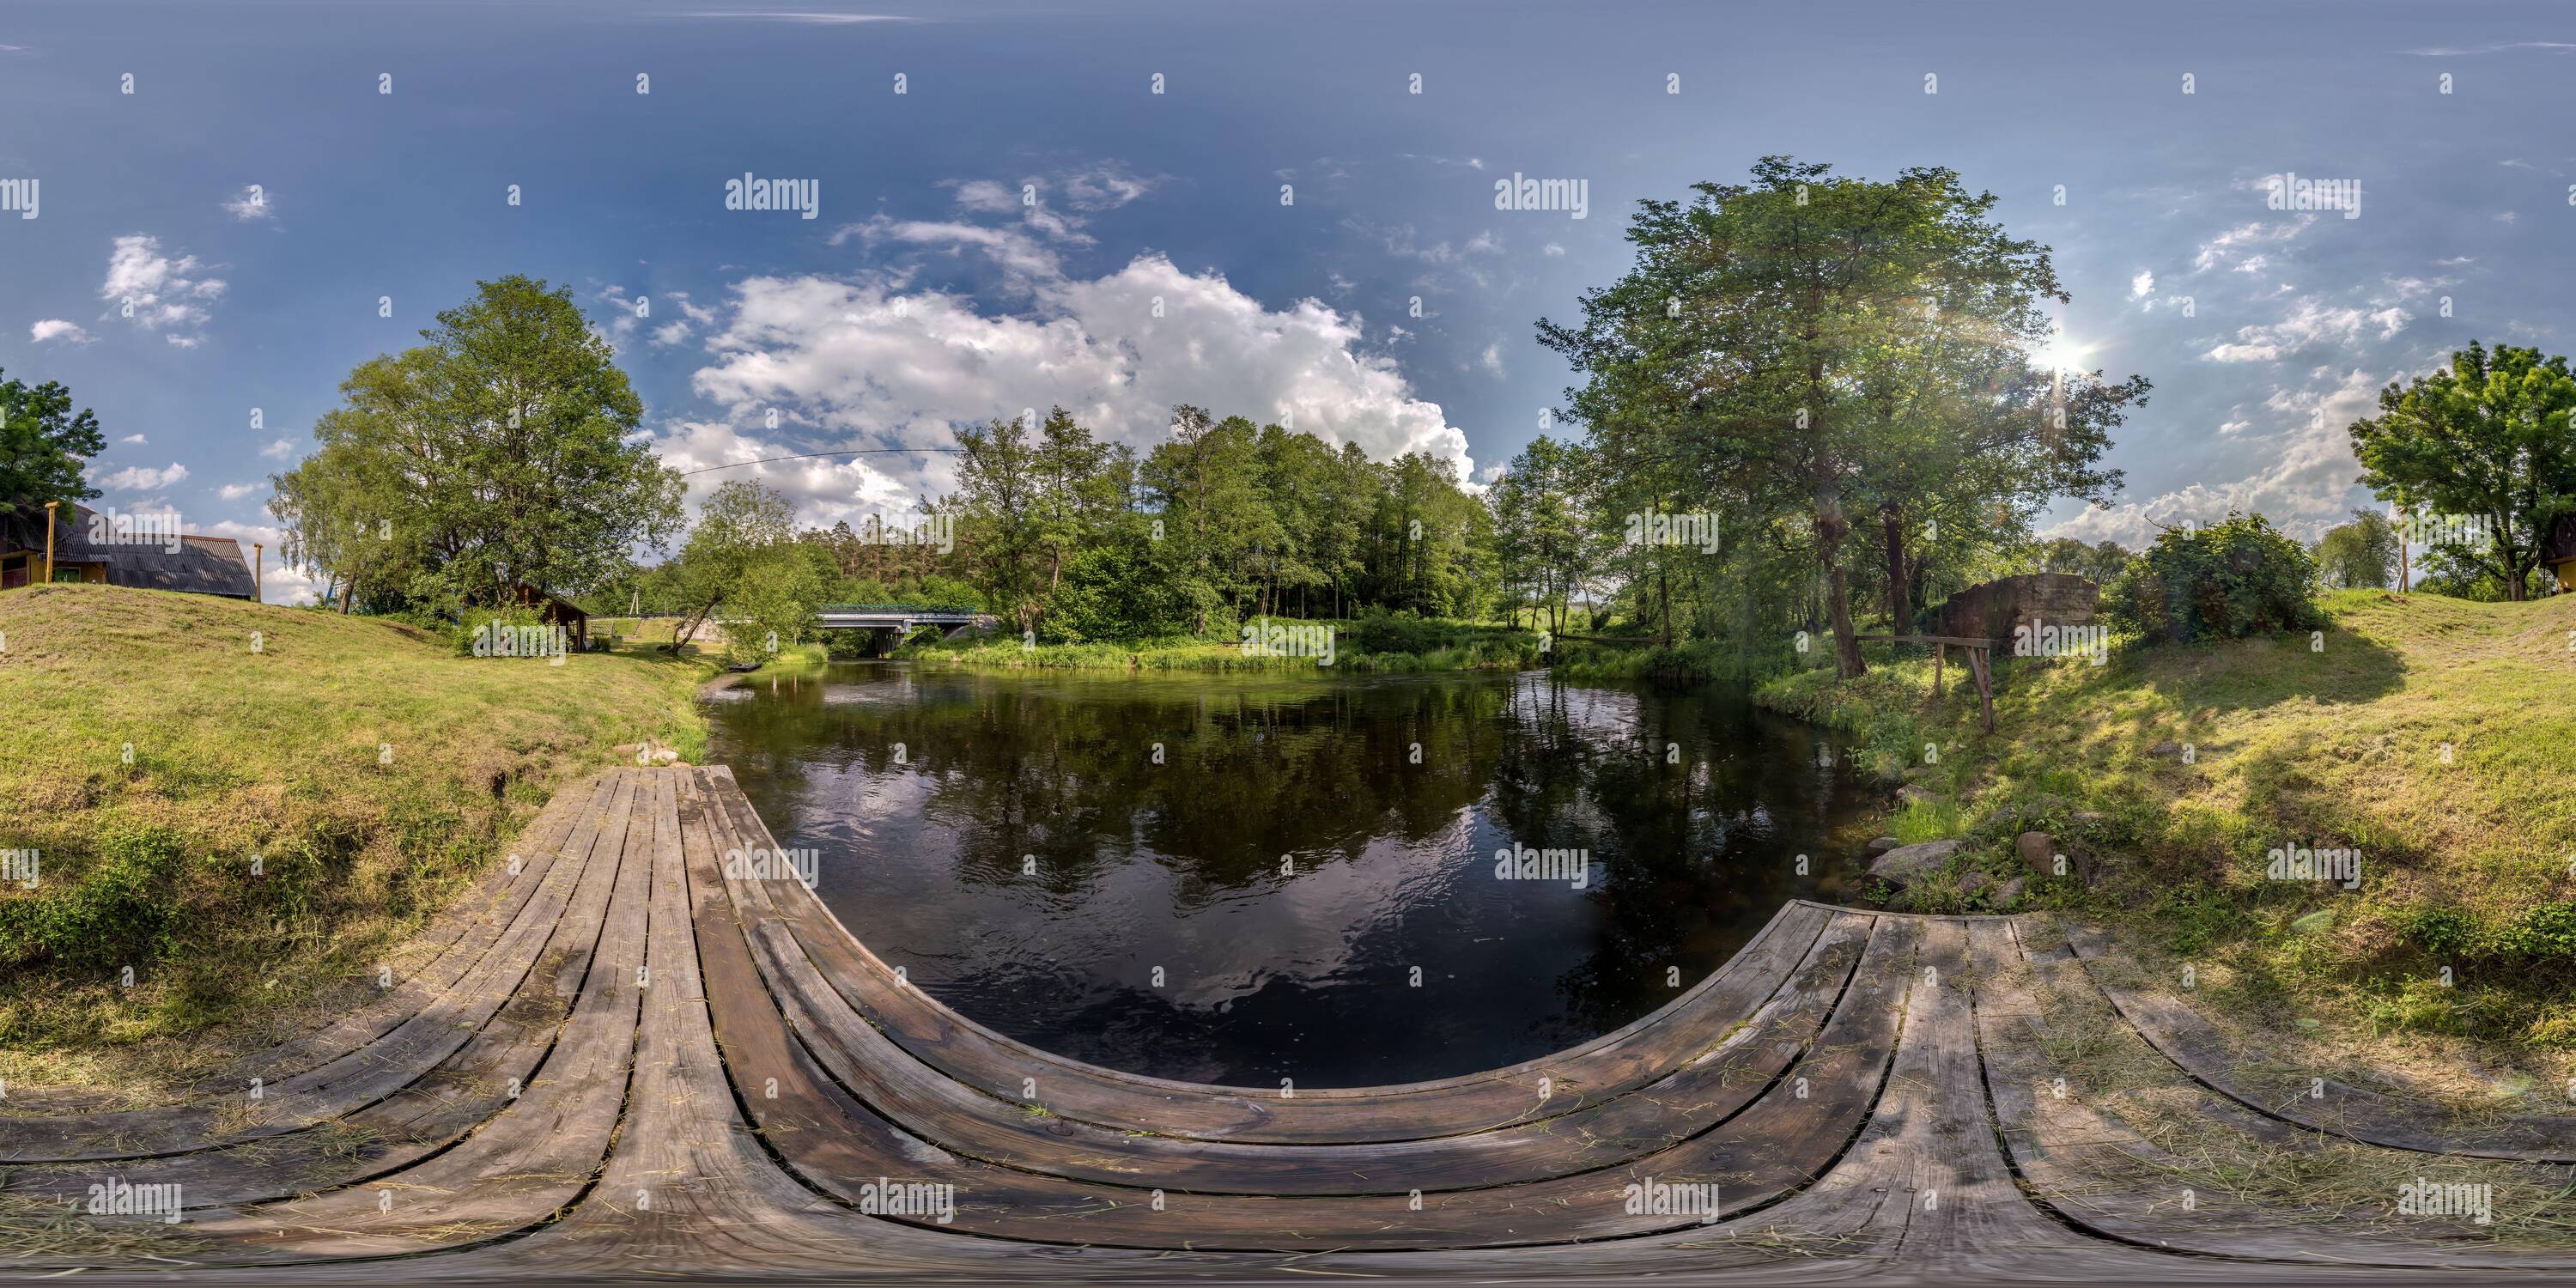 360-view-of-full-seamless-spherical-hdri-panorama-360-degrees-angle-view-on-wooden-pier-of-lake